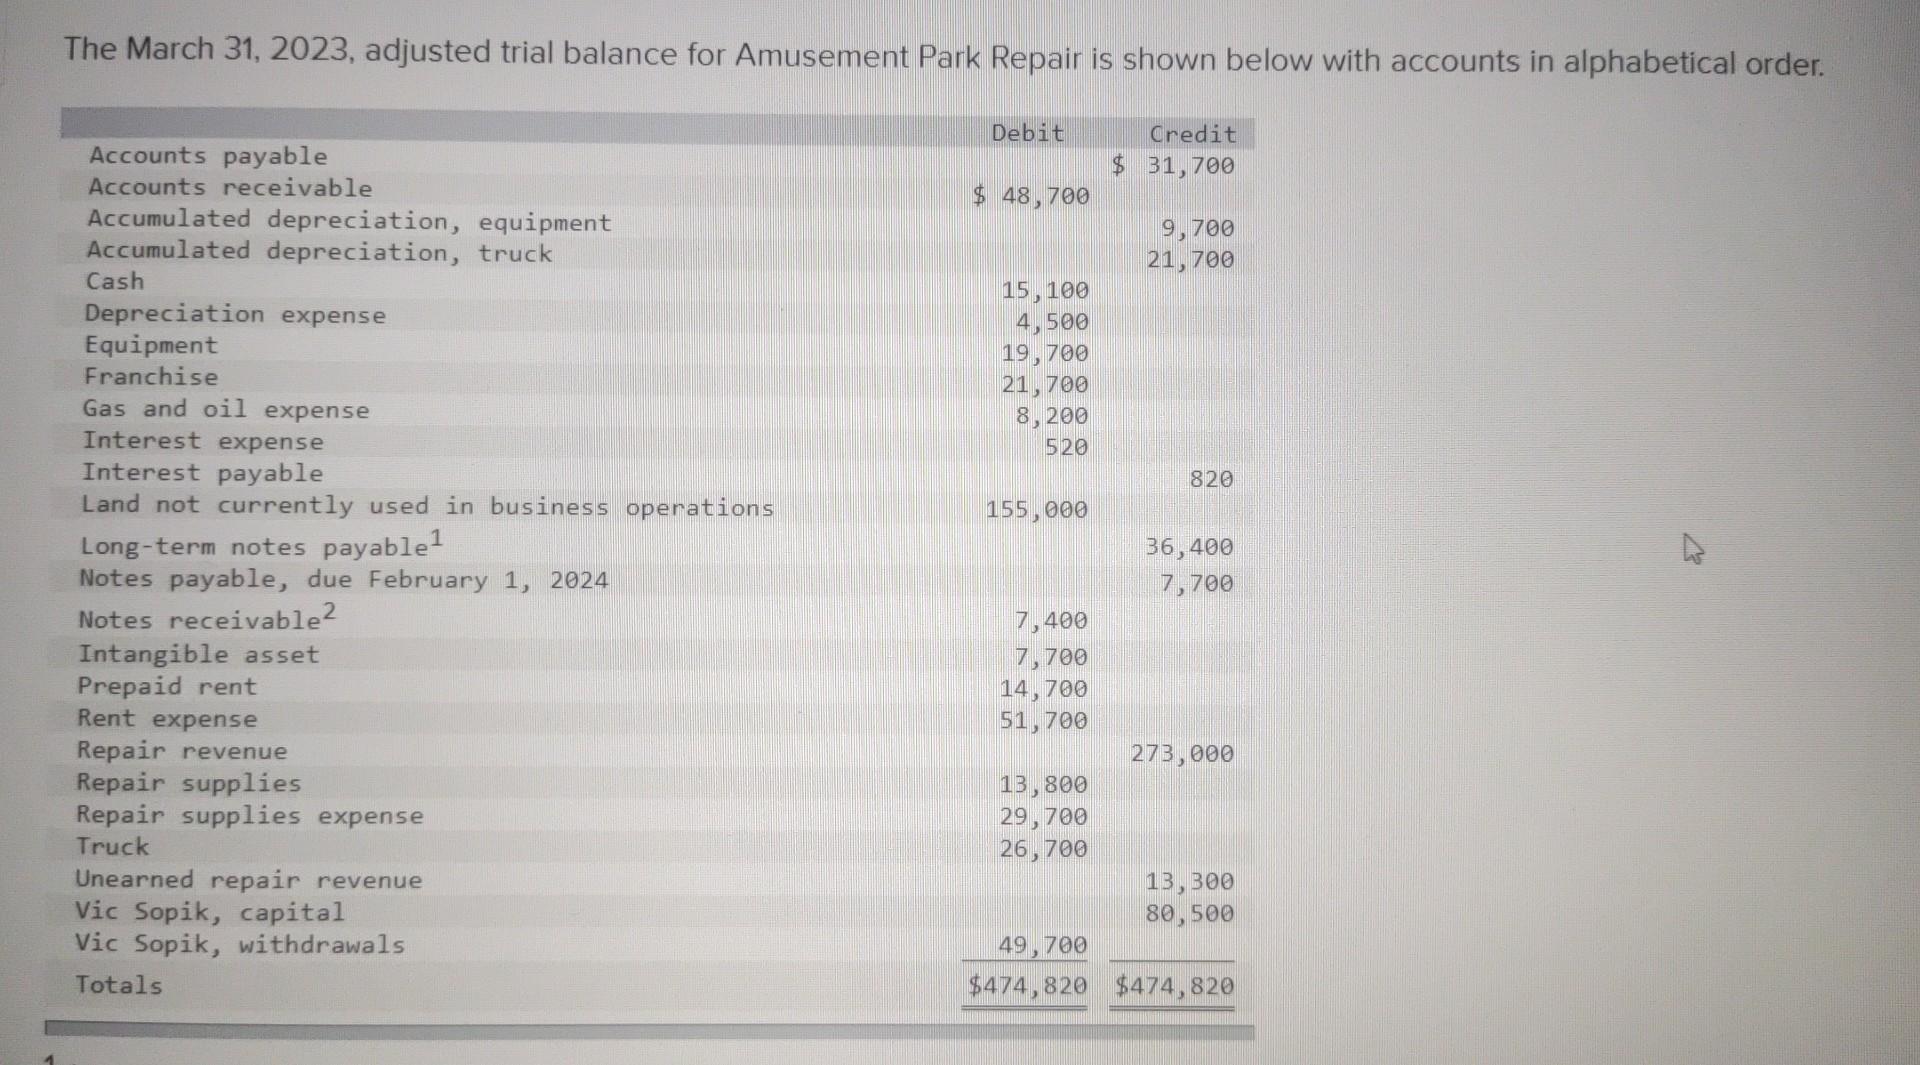 The March 31, 2023, adjusted trial balance for Amusement Park Repair is shown below with accounts in alphabetical order.